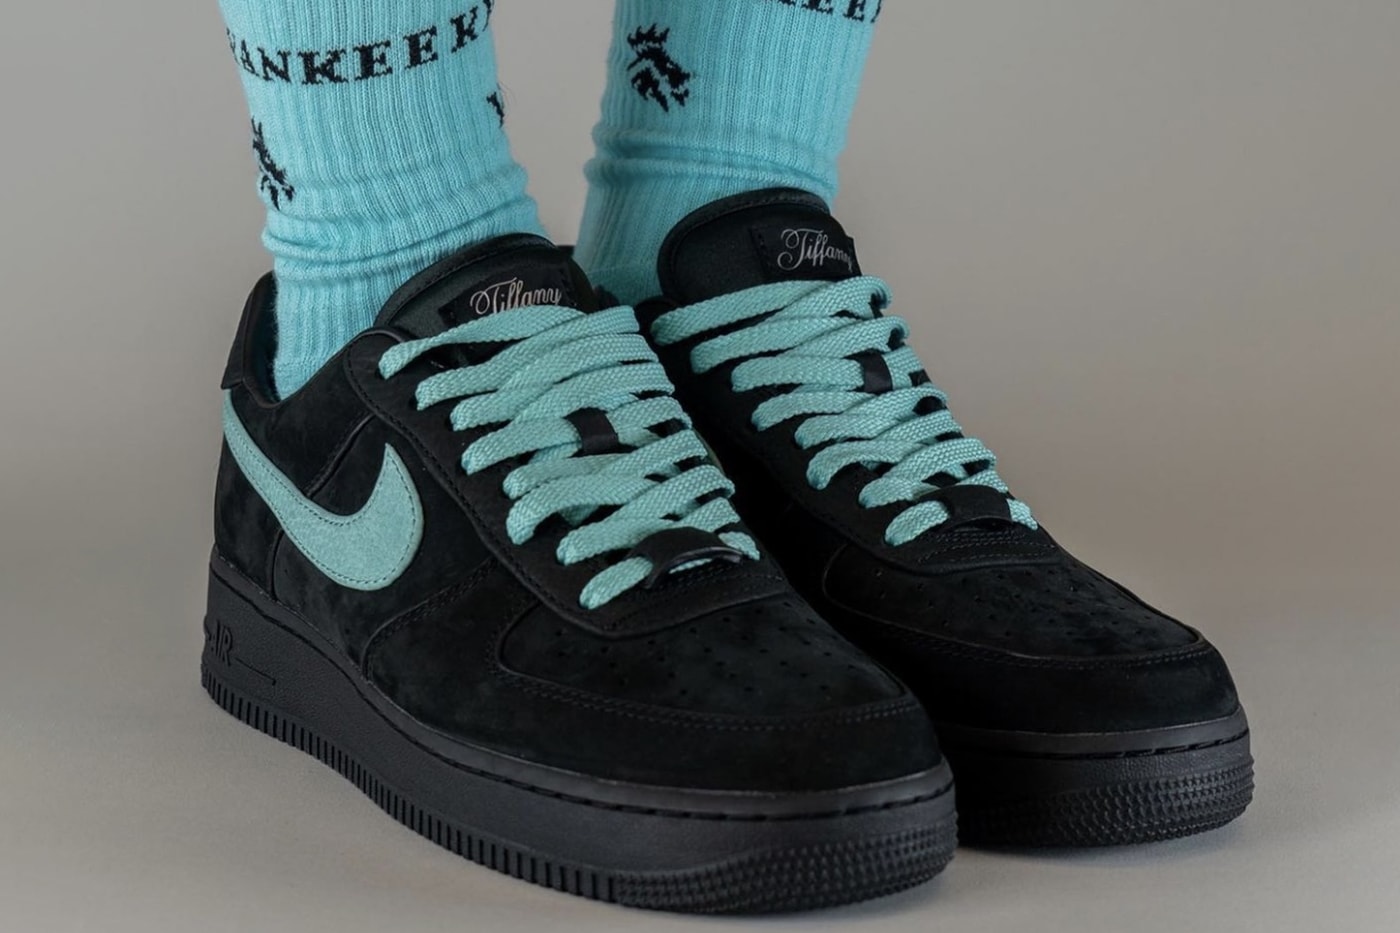 Black Nike Air Force 1 Low Appears With Teal Swooshes